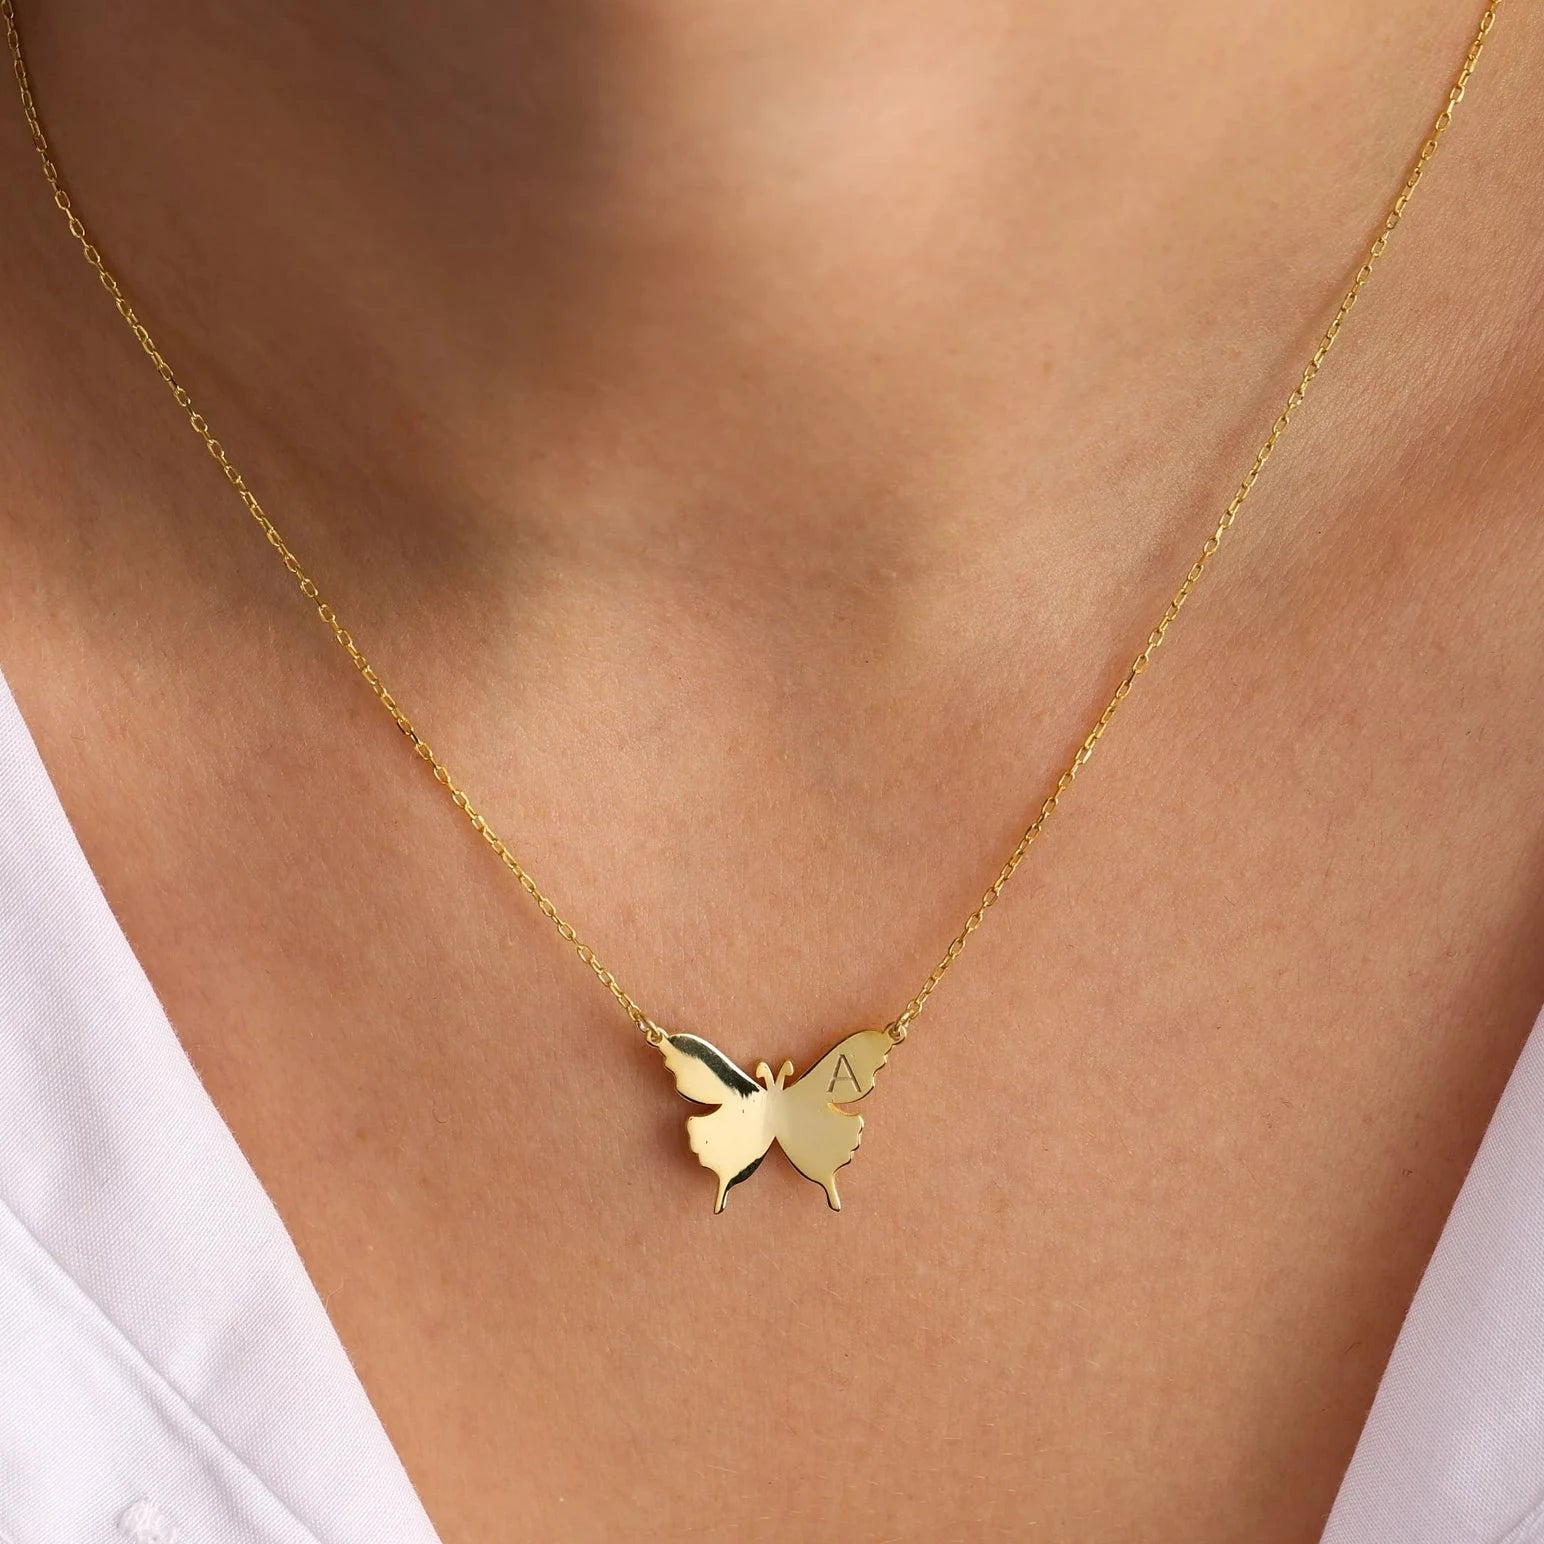 Gold initial necklace for wife, handcrafted in Dubai. Minimalist jewelry, luxury birthday gift for wife. Delivery across the UAE.